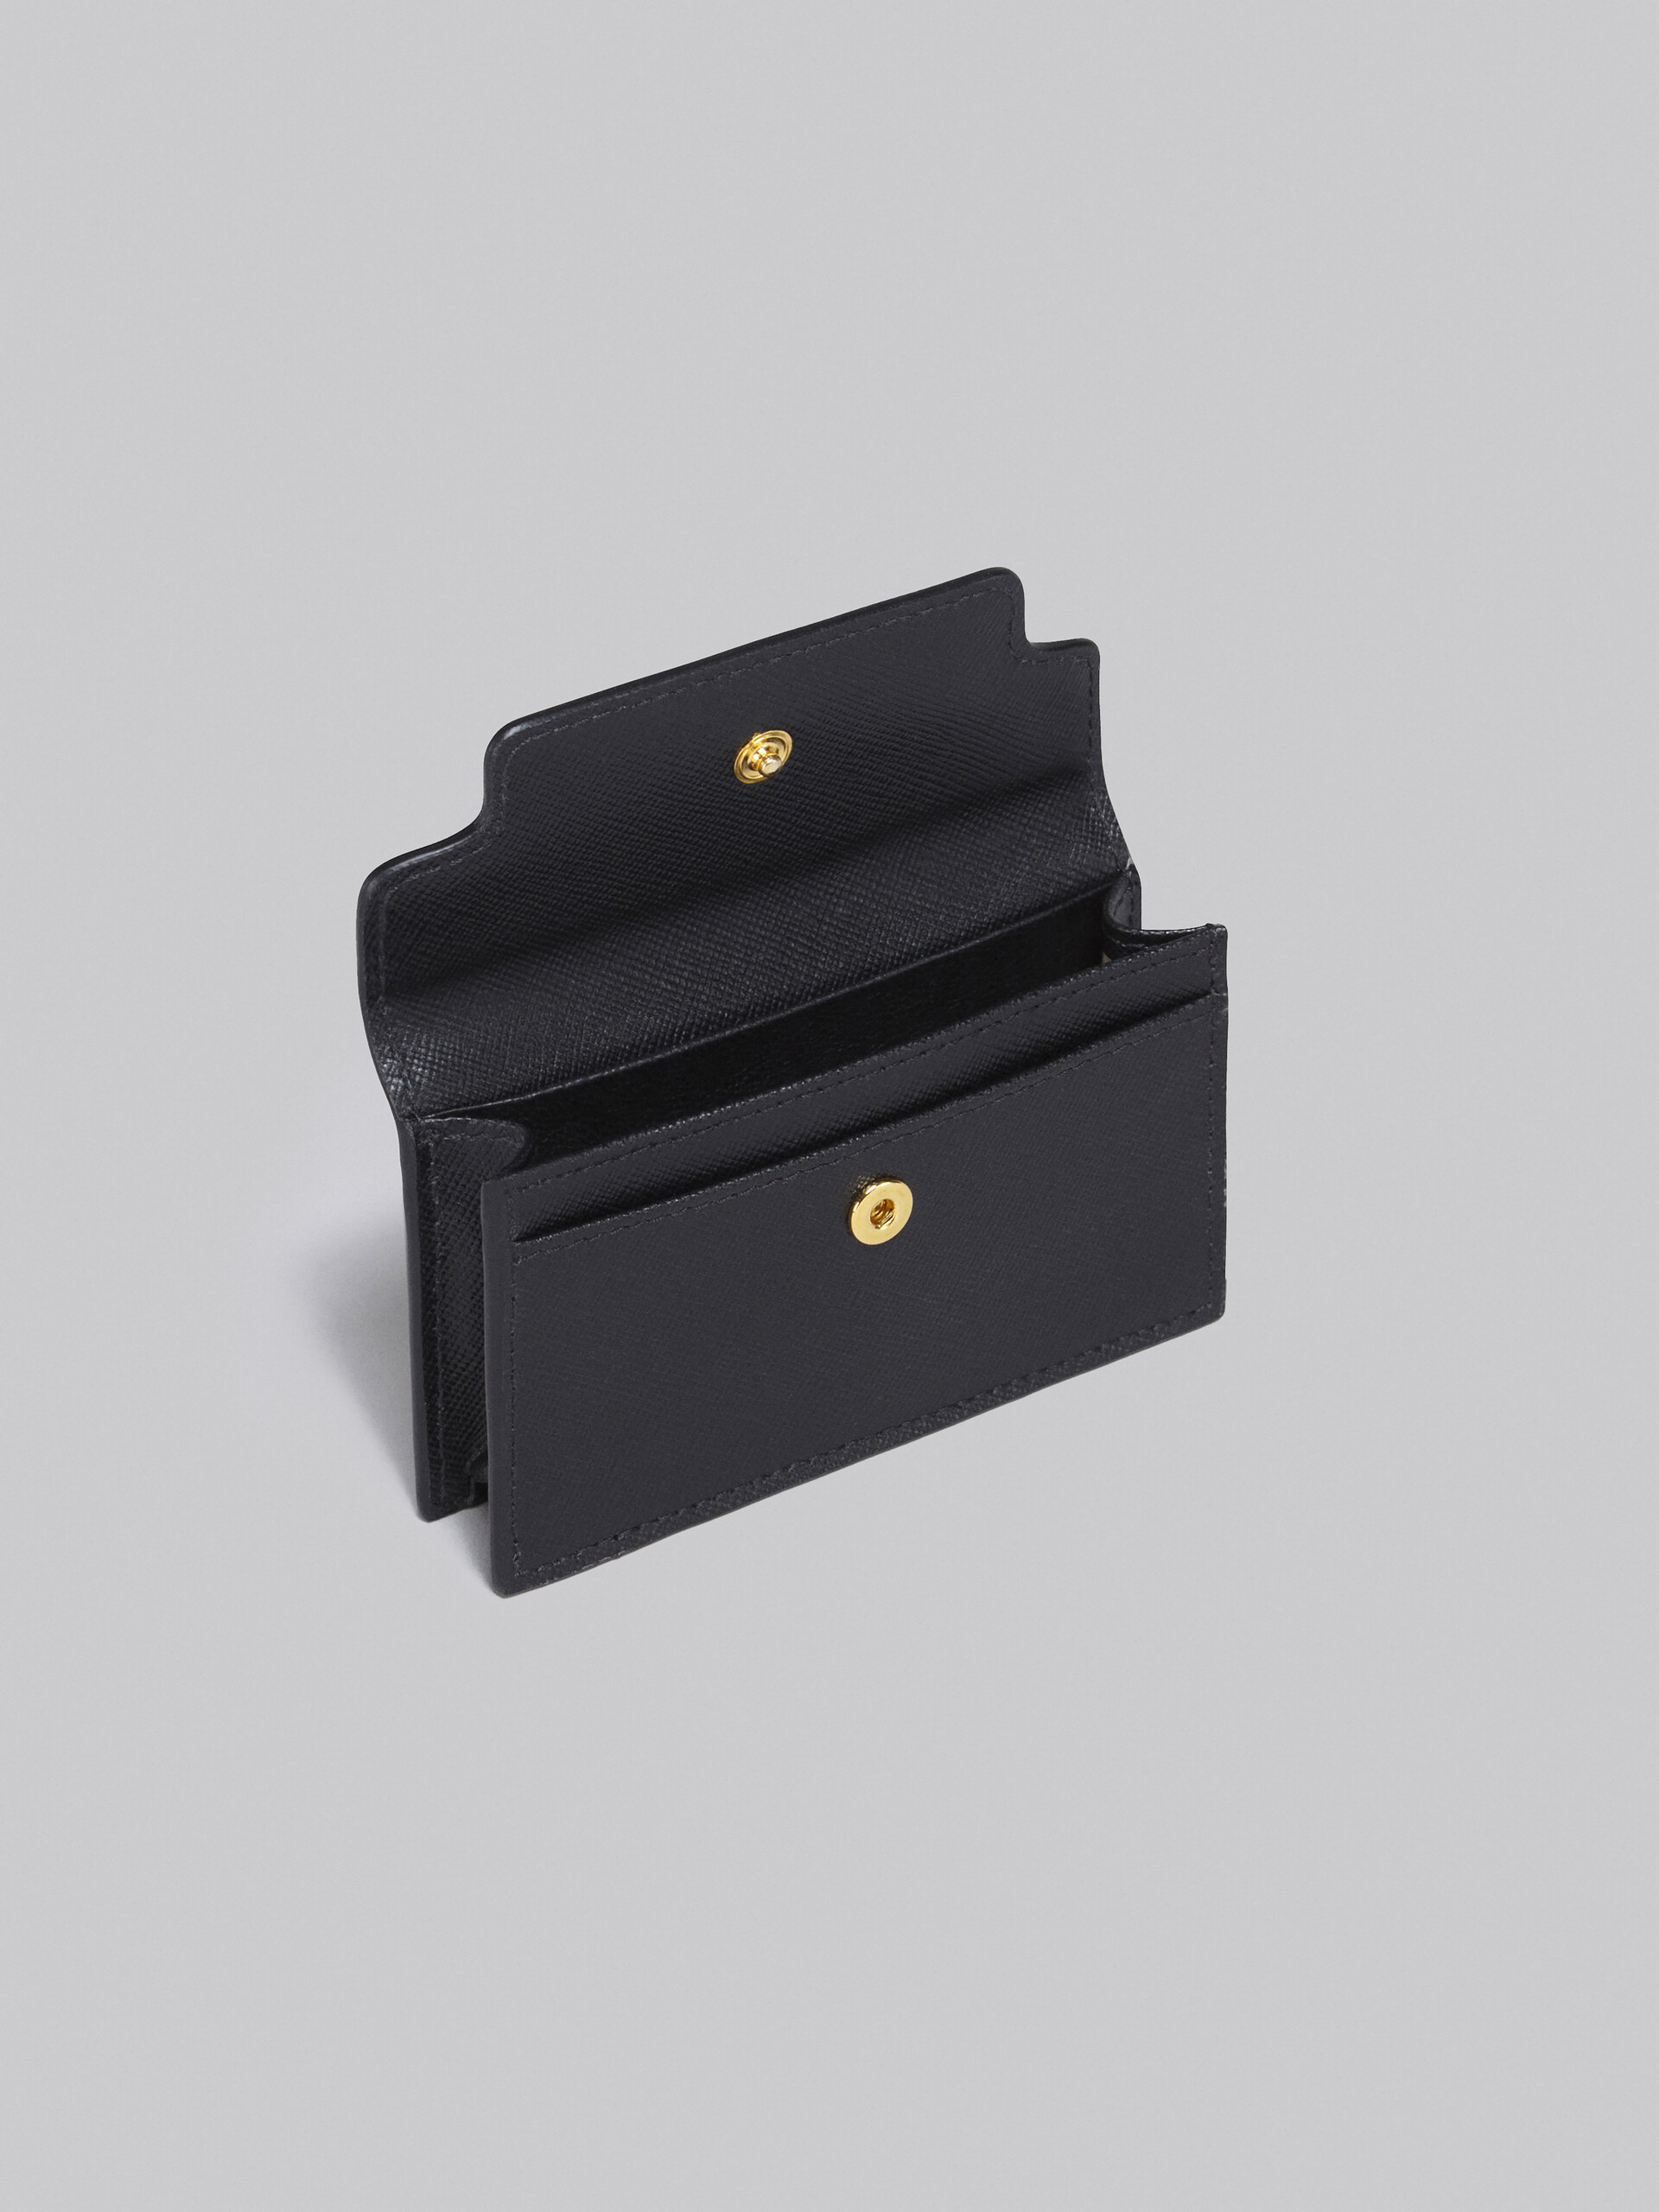 Black saffiano leather business card case - Wallets - Image 2